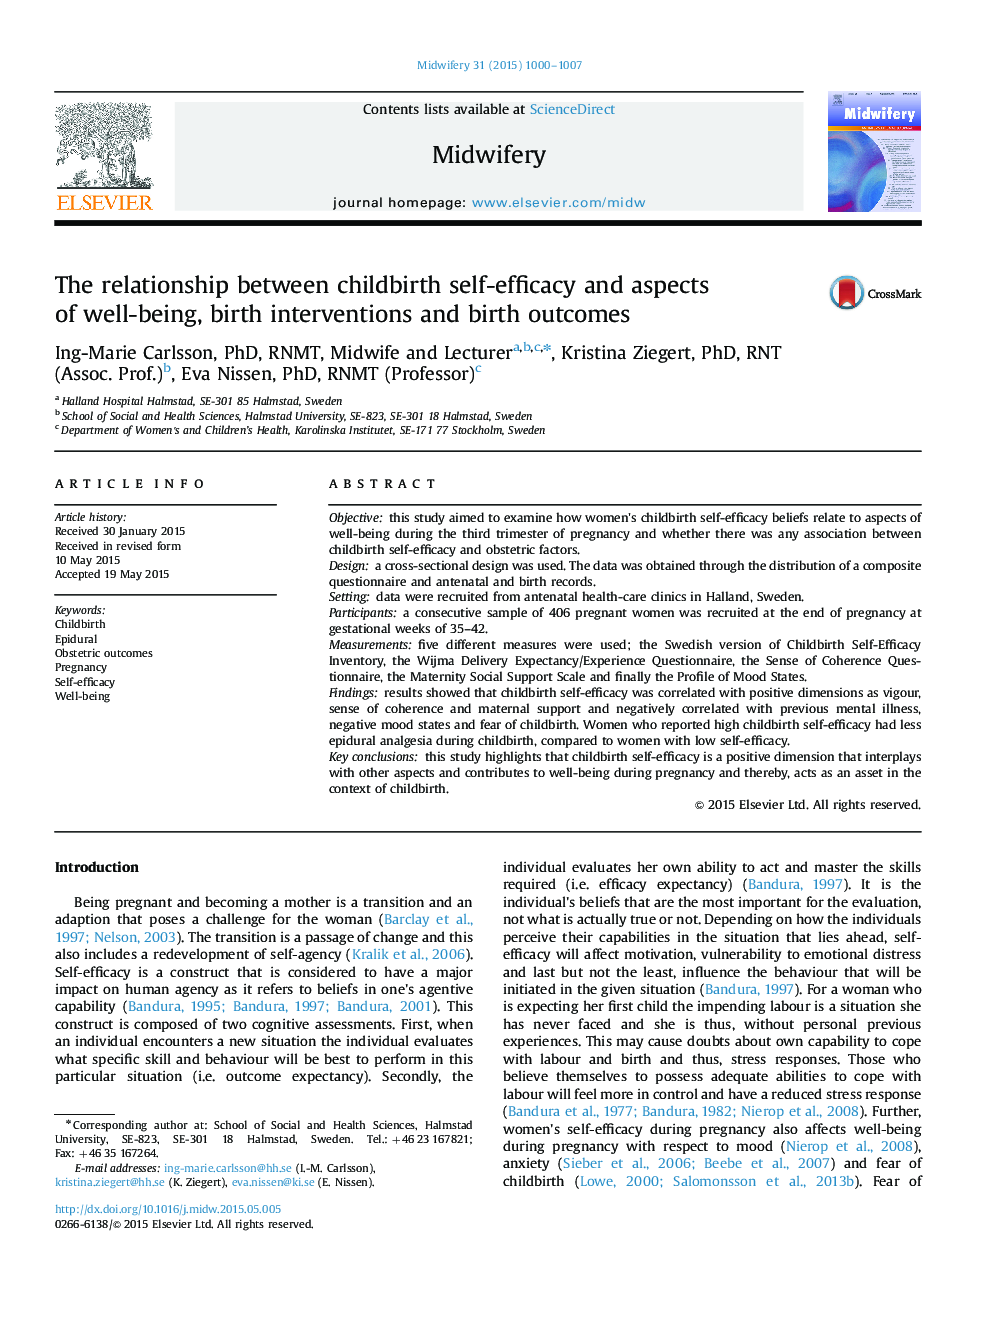 The relationship between childbirth self-efficacy and aspects of well-being, birth interventions and birth outcomes